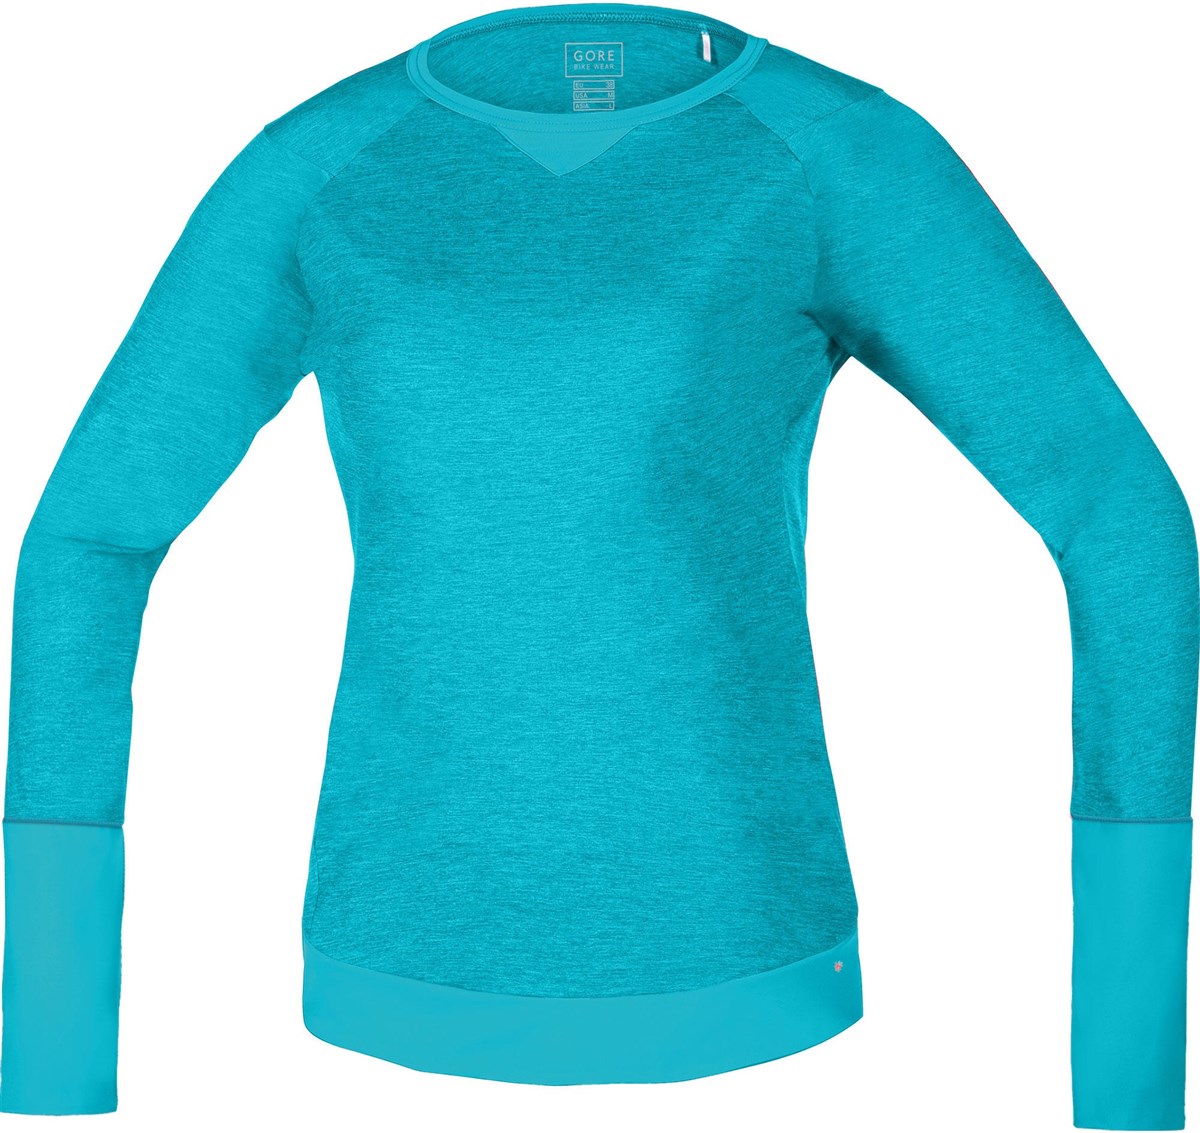 Gore Power Trail Womens Long Sleeve Jersey AW17 product image